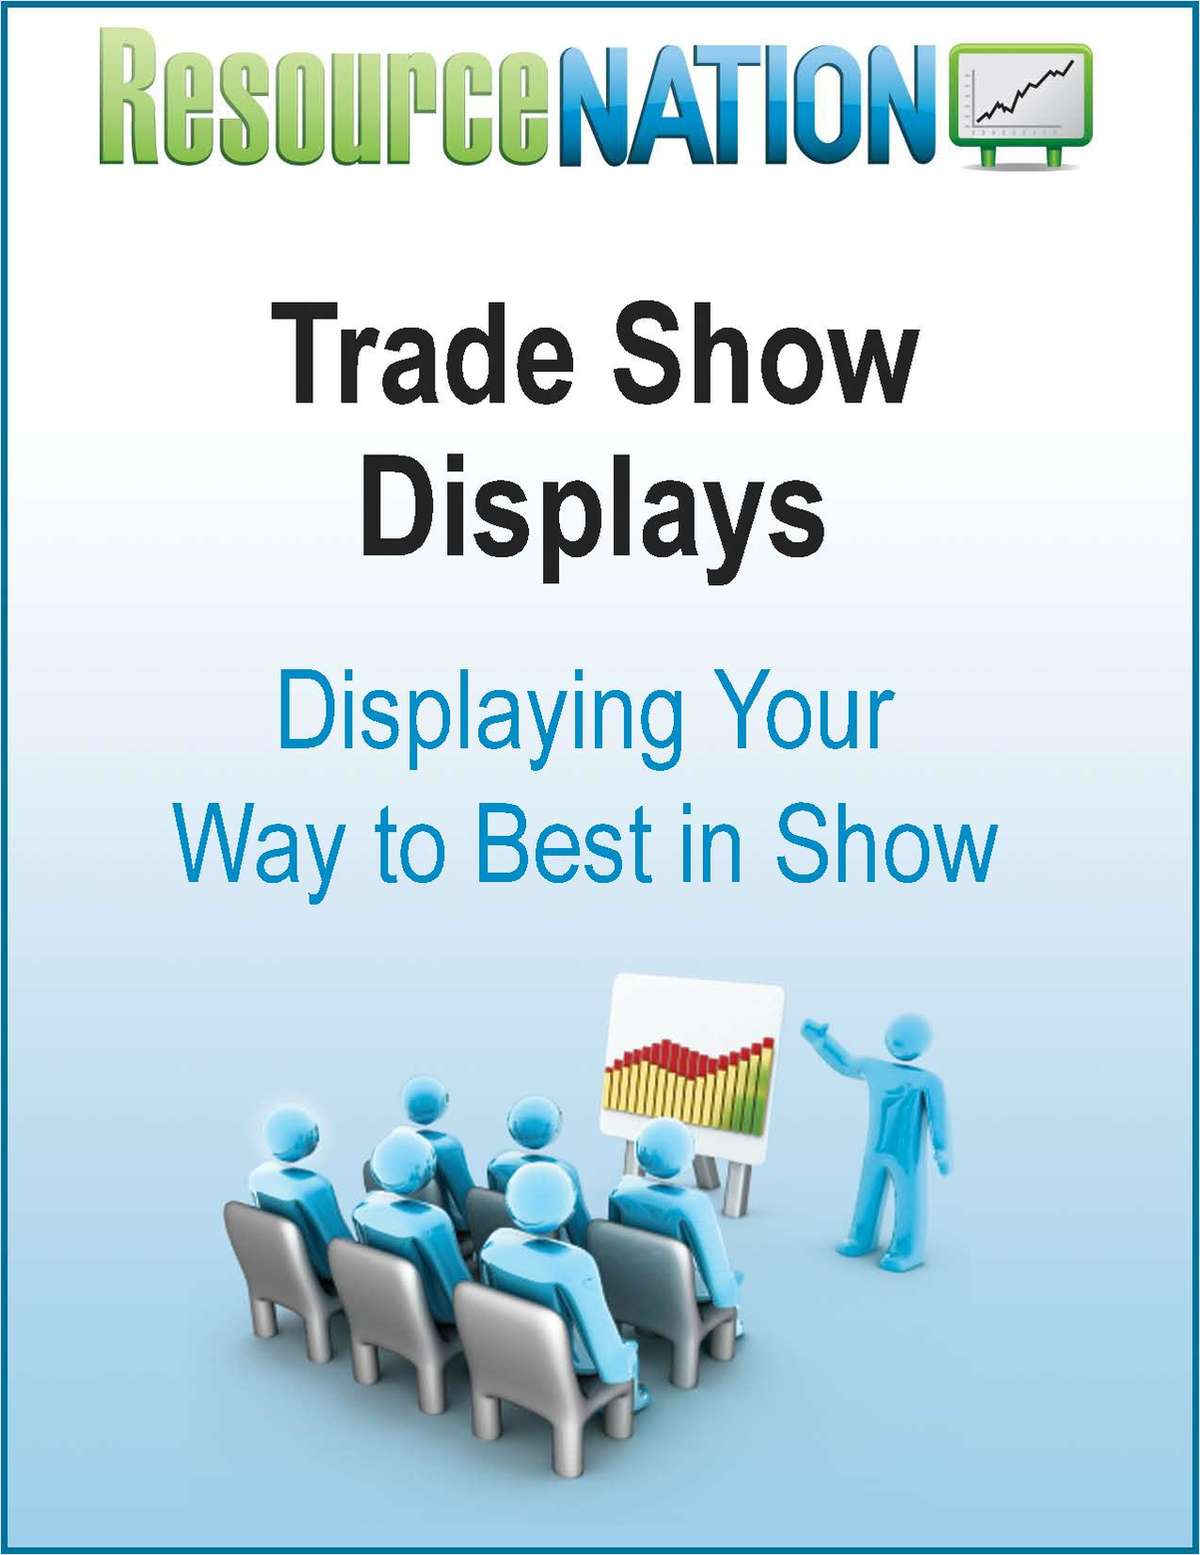 How to Make Your Trade Show Display Stand Out